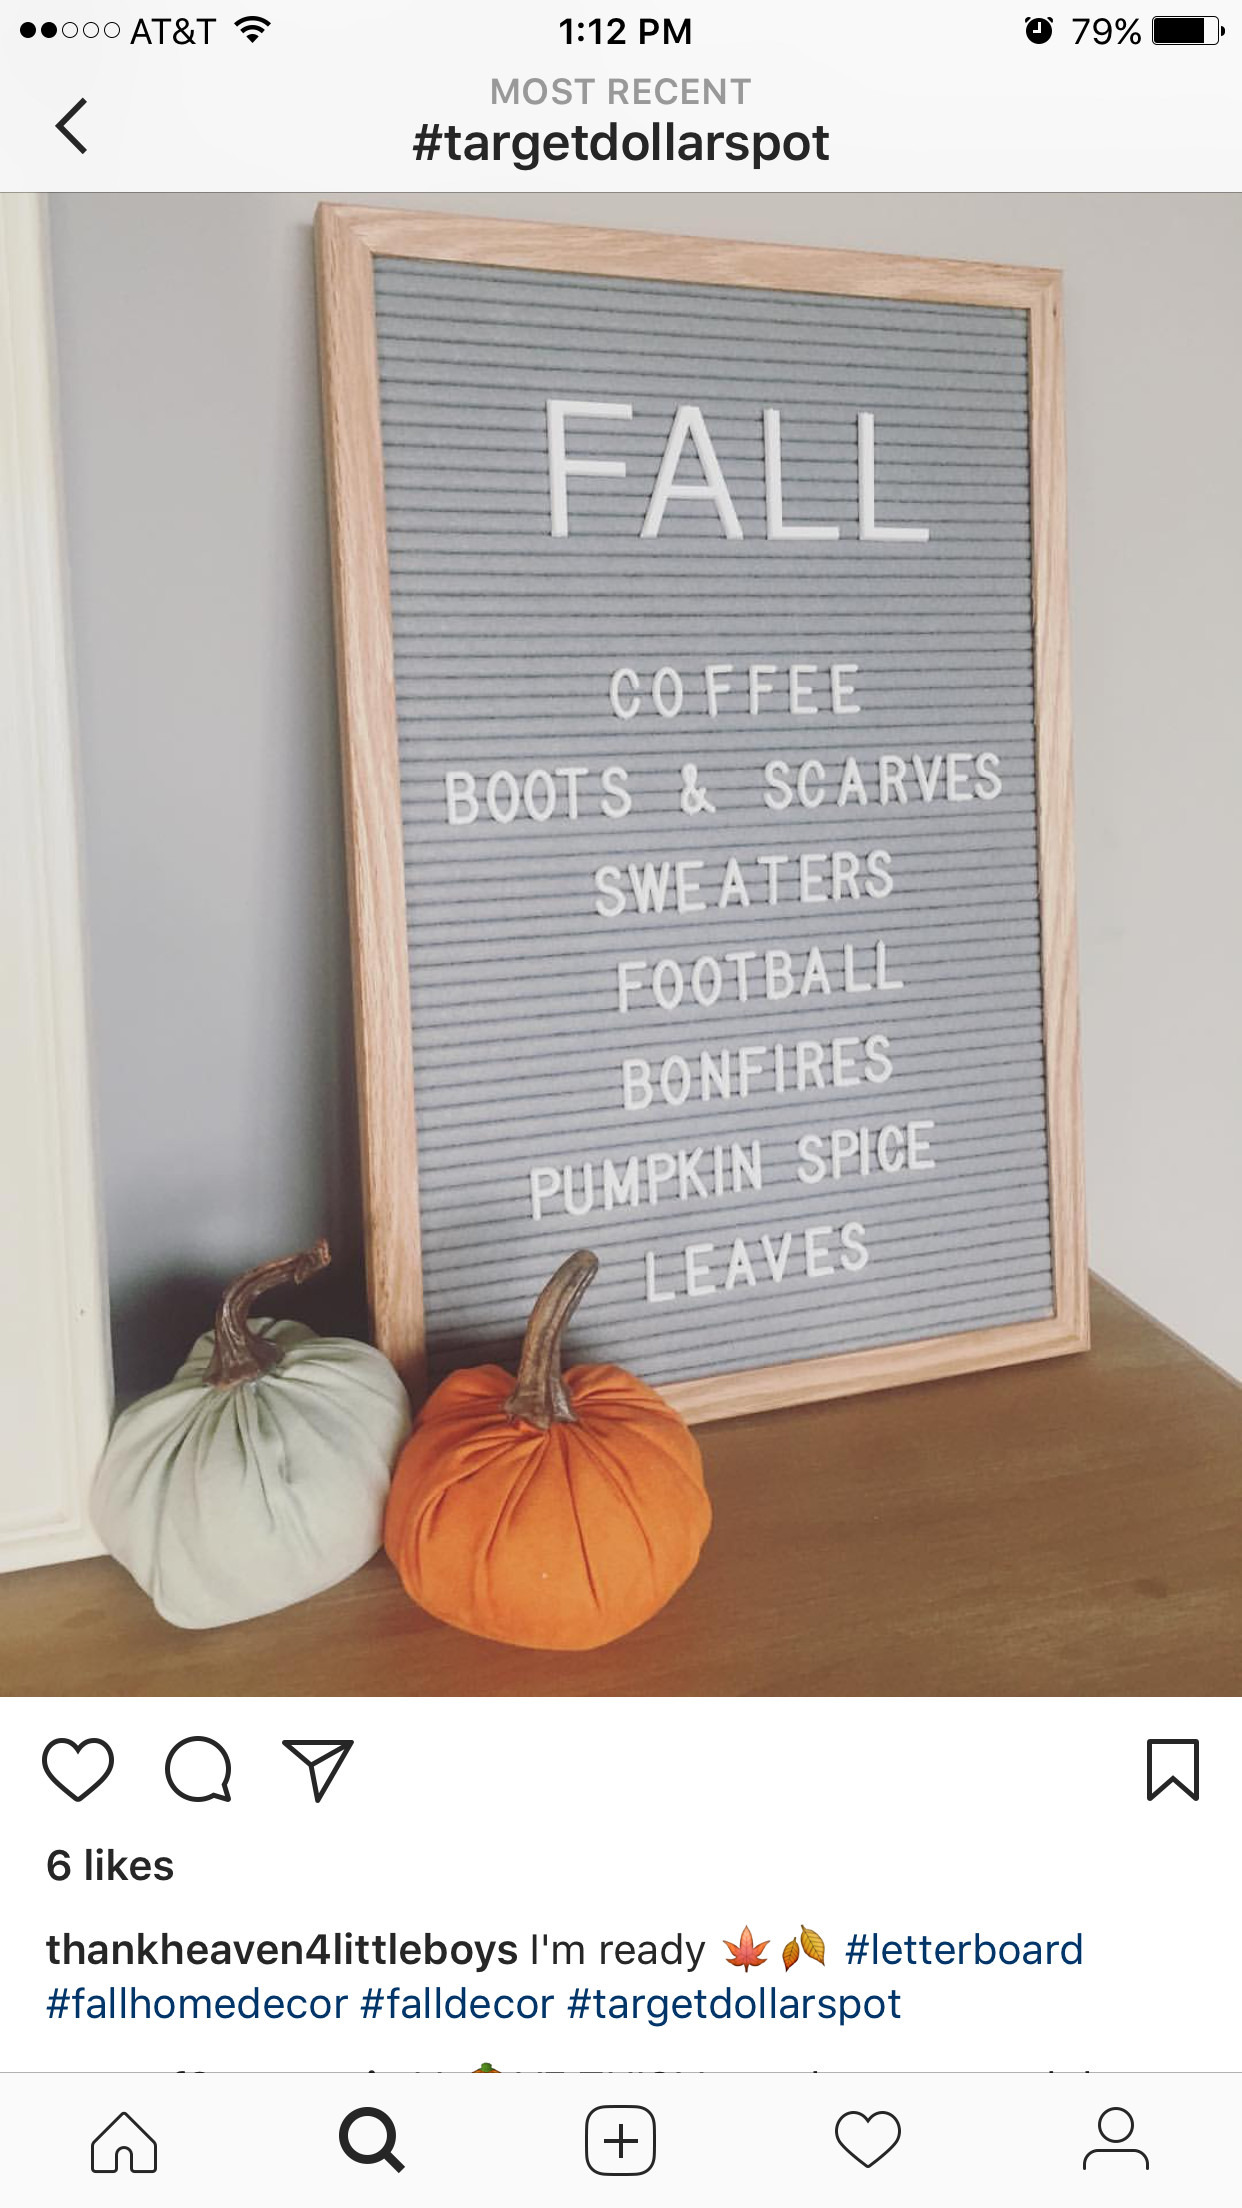 Thanksgiving Quotes For Letterboard
 Pin by Chrissy House Mastrangelo on Letterboard quotes